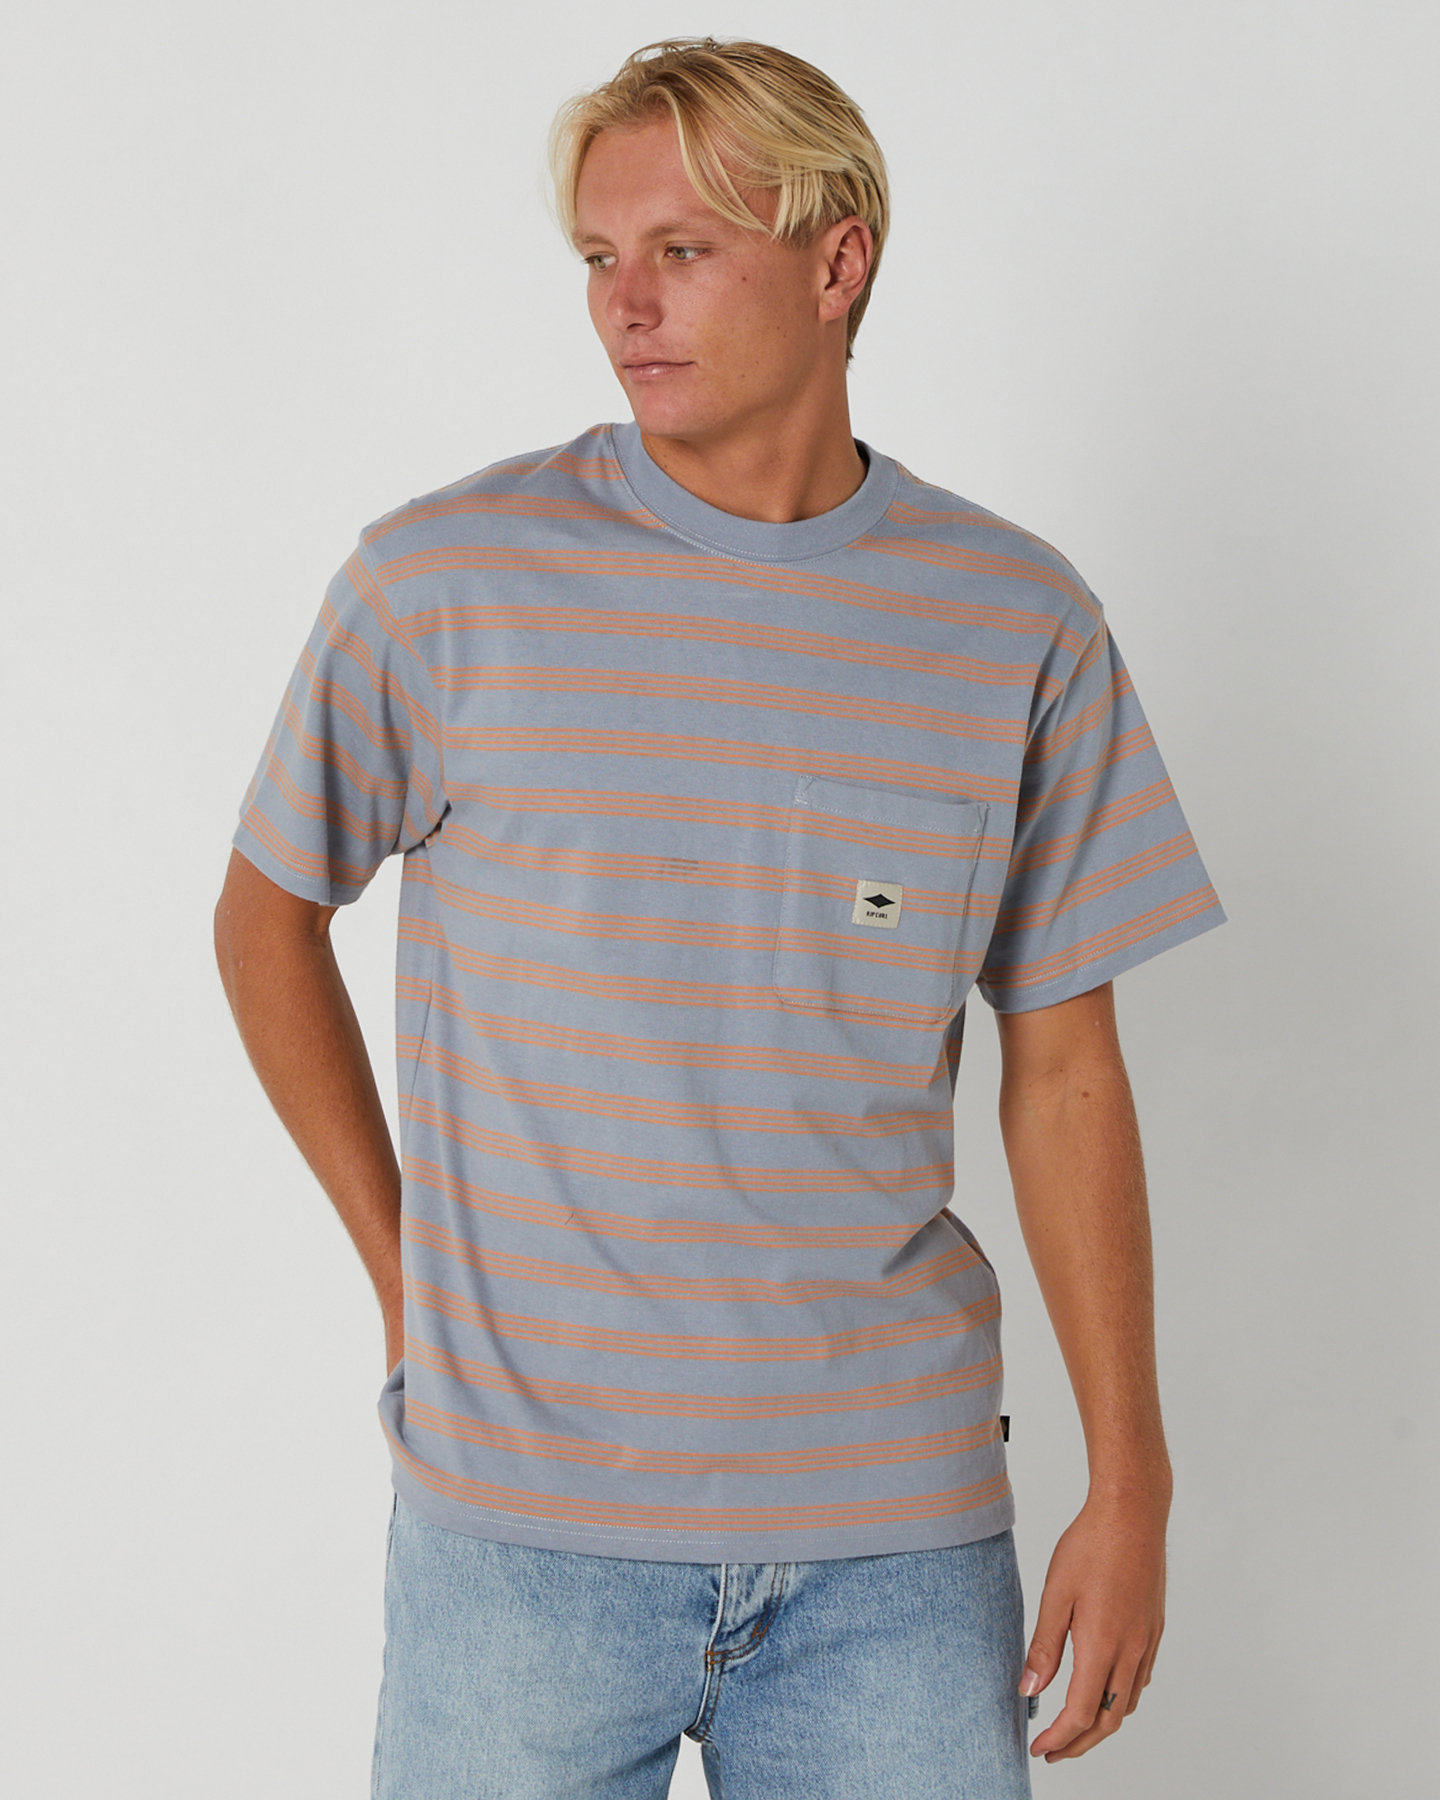 Rip Curl Quality Surf Products Stripe Ss Tee - Tradewinds | SurfStitch